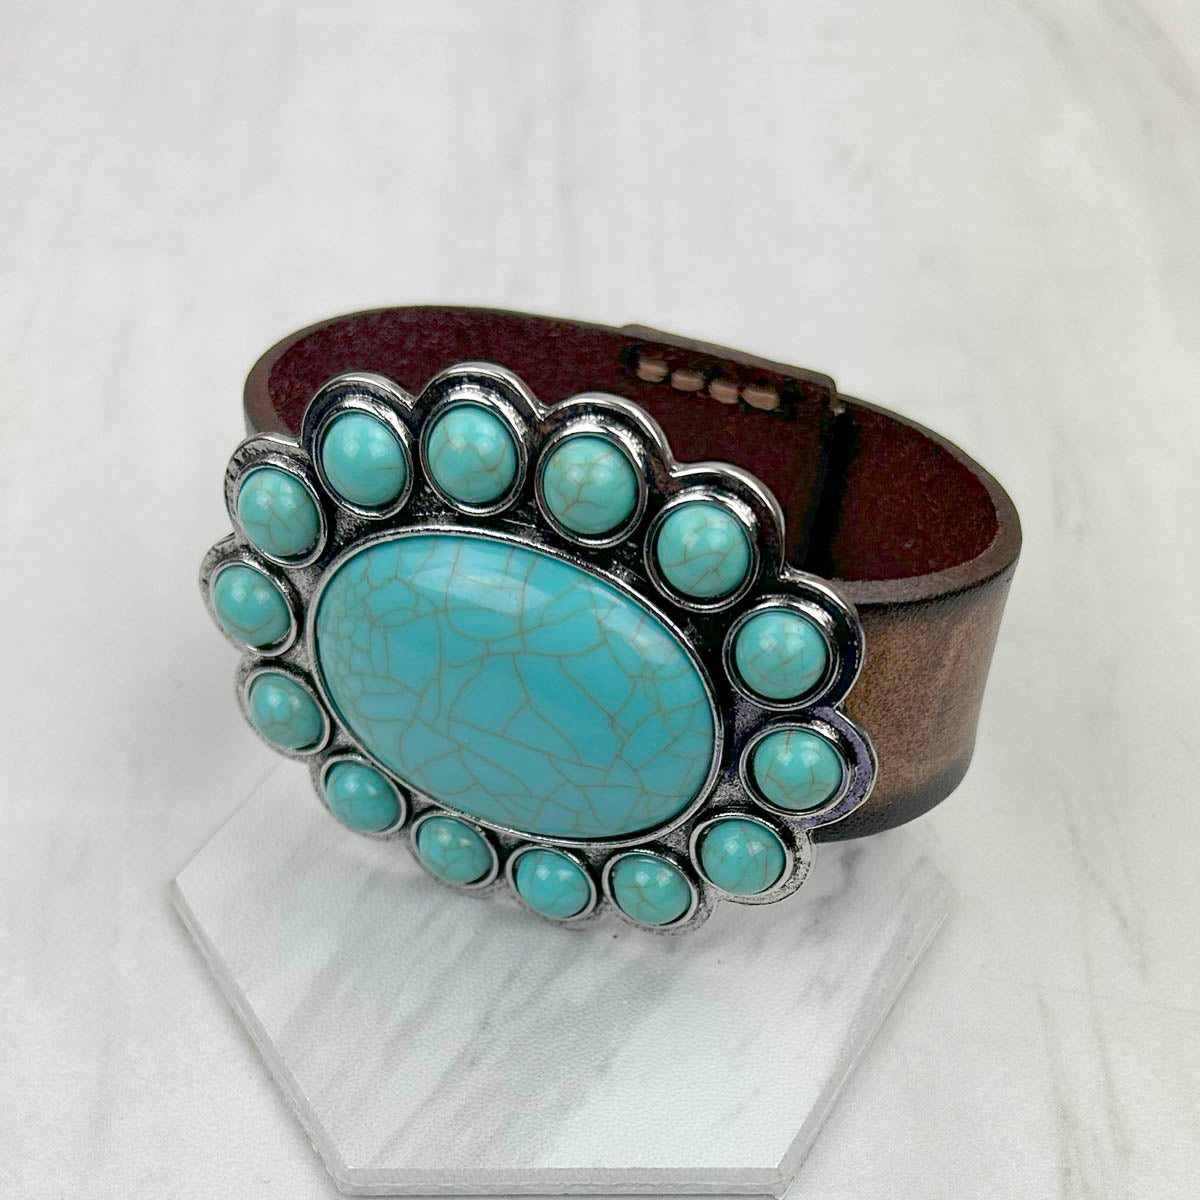 NKZ231226-11               Brown leather with large blue turquoise stone oval concho bracelet